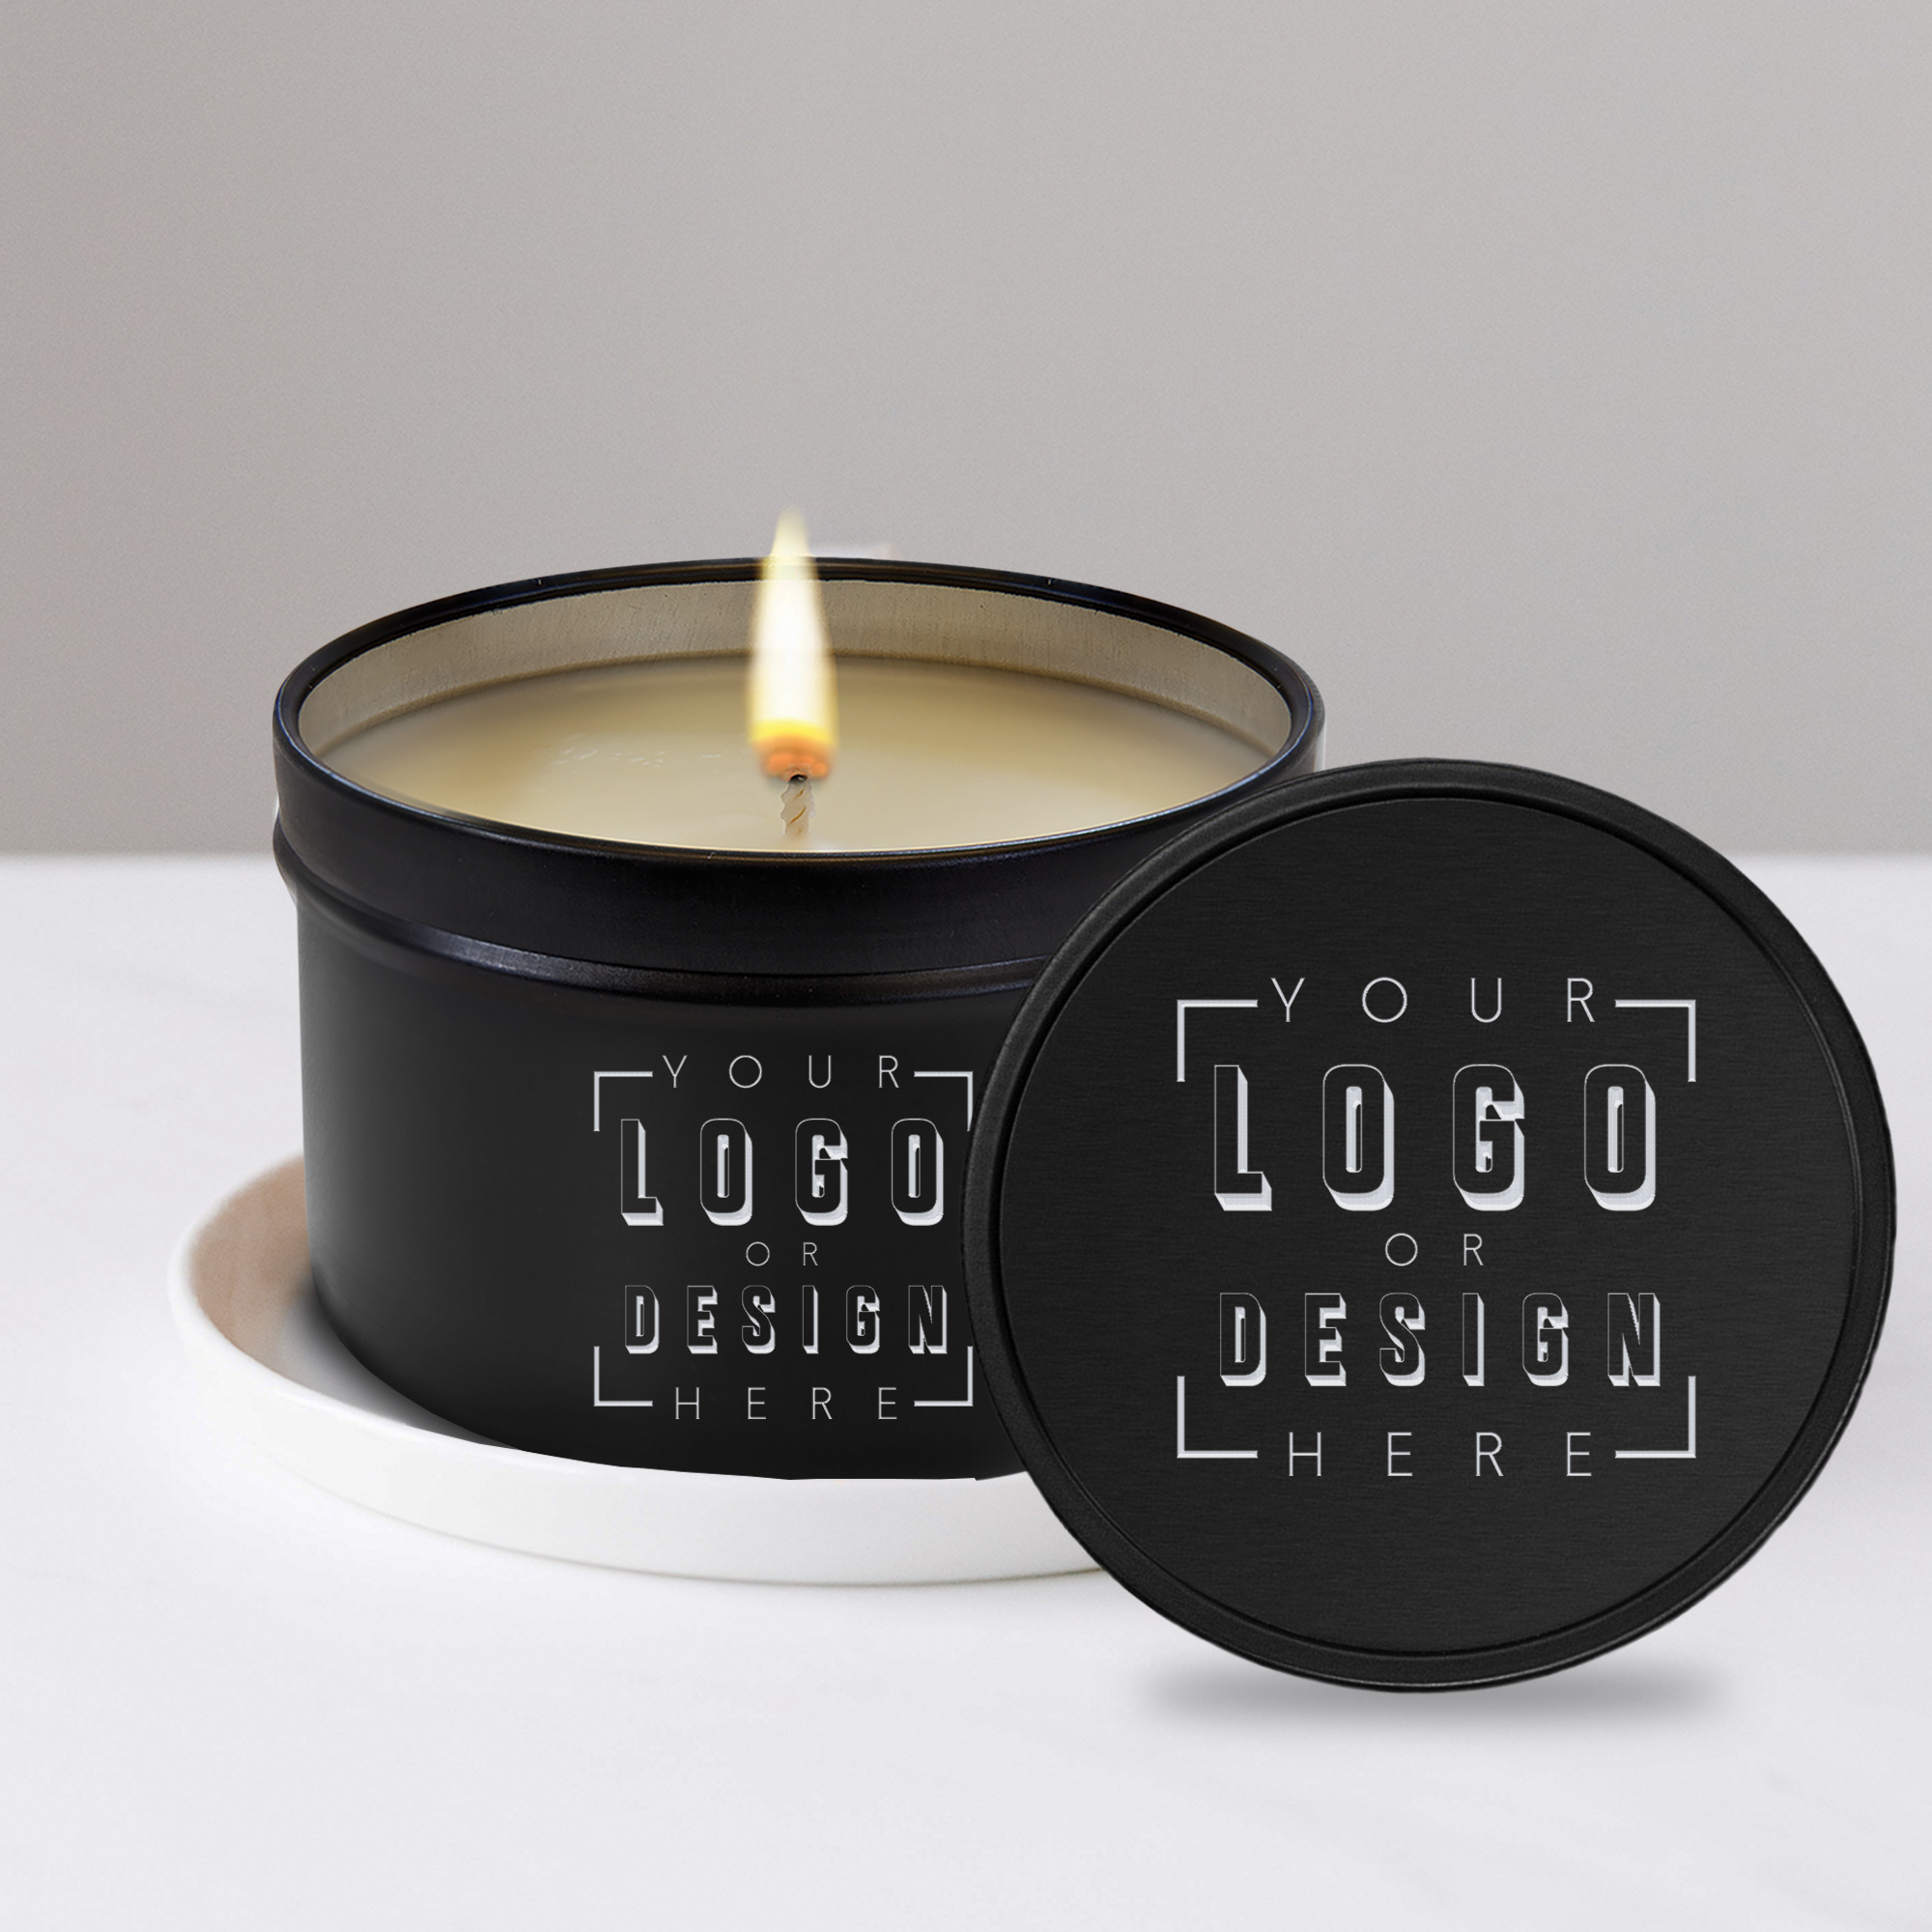 Personalized 8 oz. Candle in Black Metal Tin